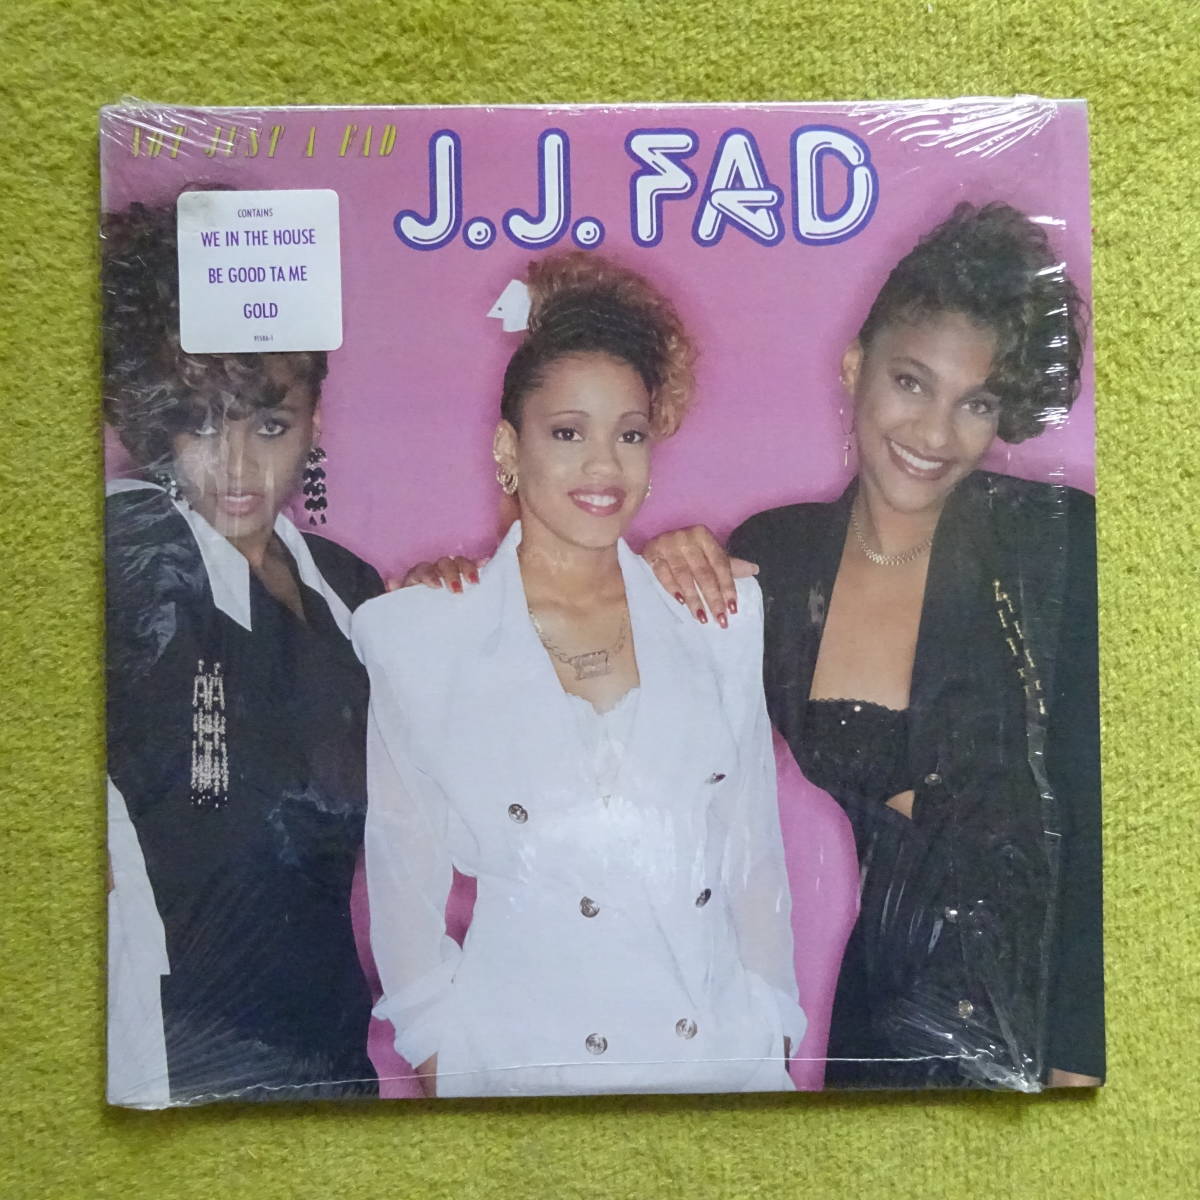 J.J. Fad Not Just A Fad* Ruthless Records 盤 We In The House Gold Be Good Ta Meの画像1